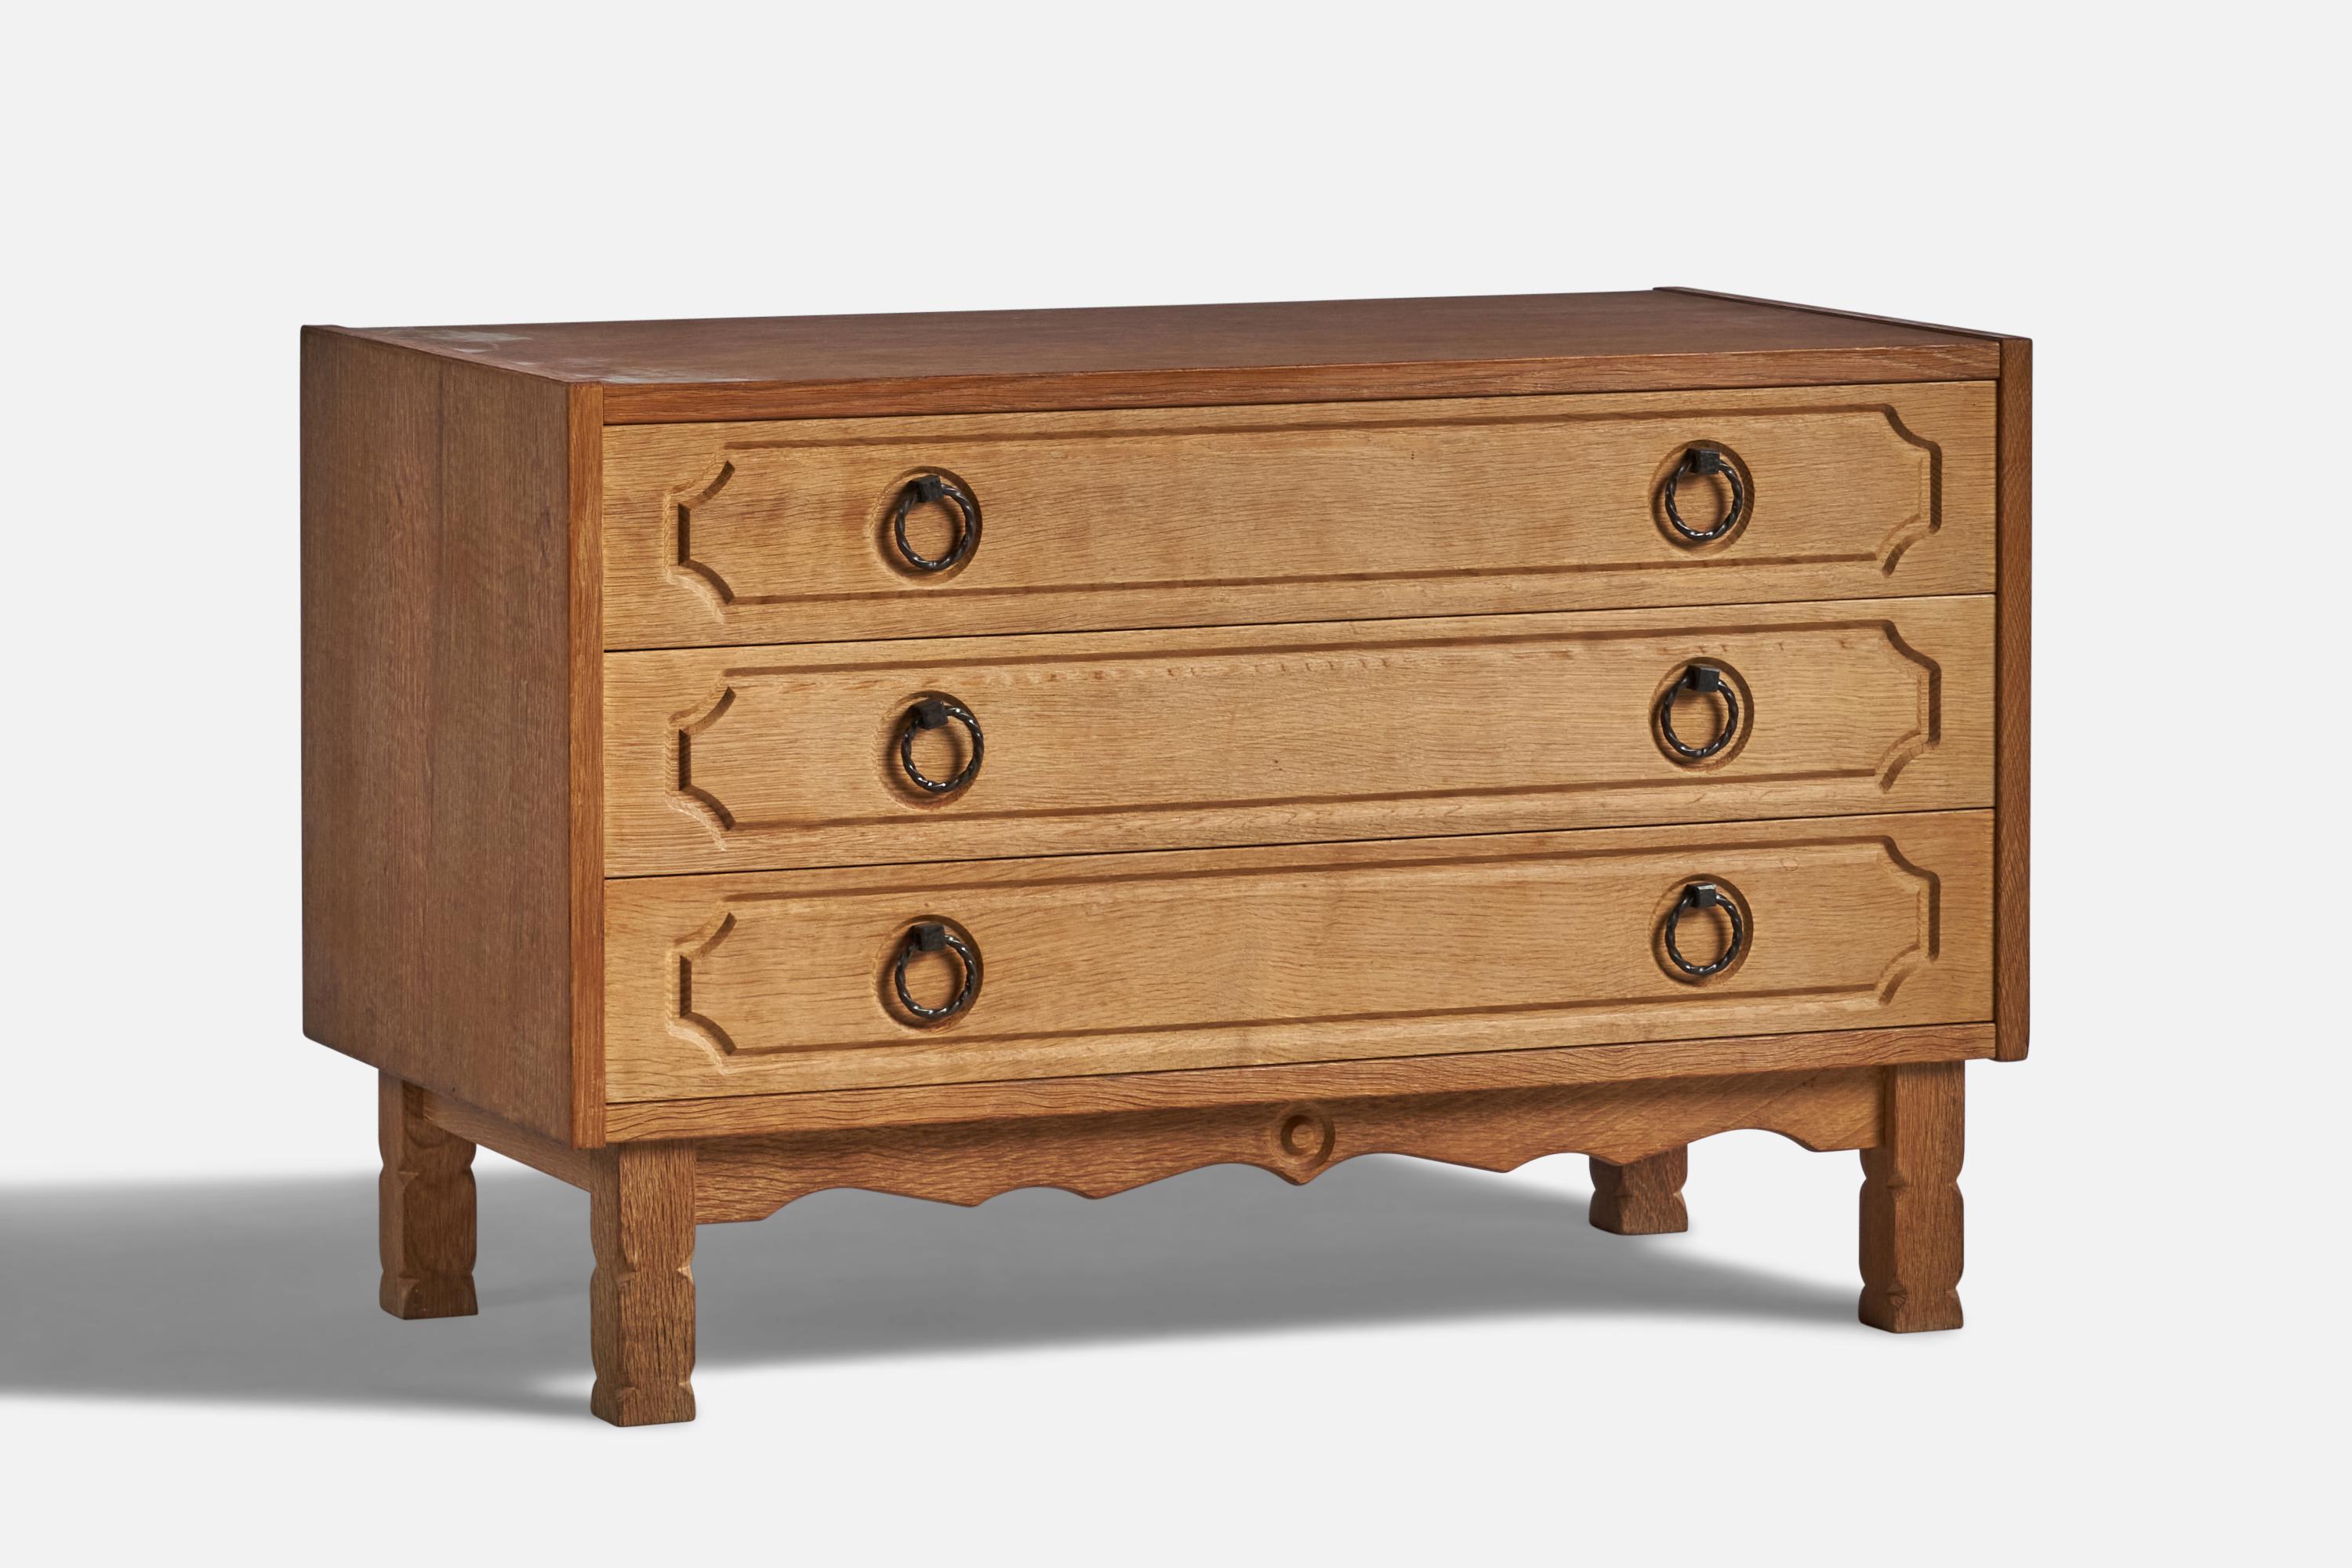 An oak and iron chest of drawers designed and produced in Denmark, 1960s.